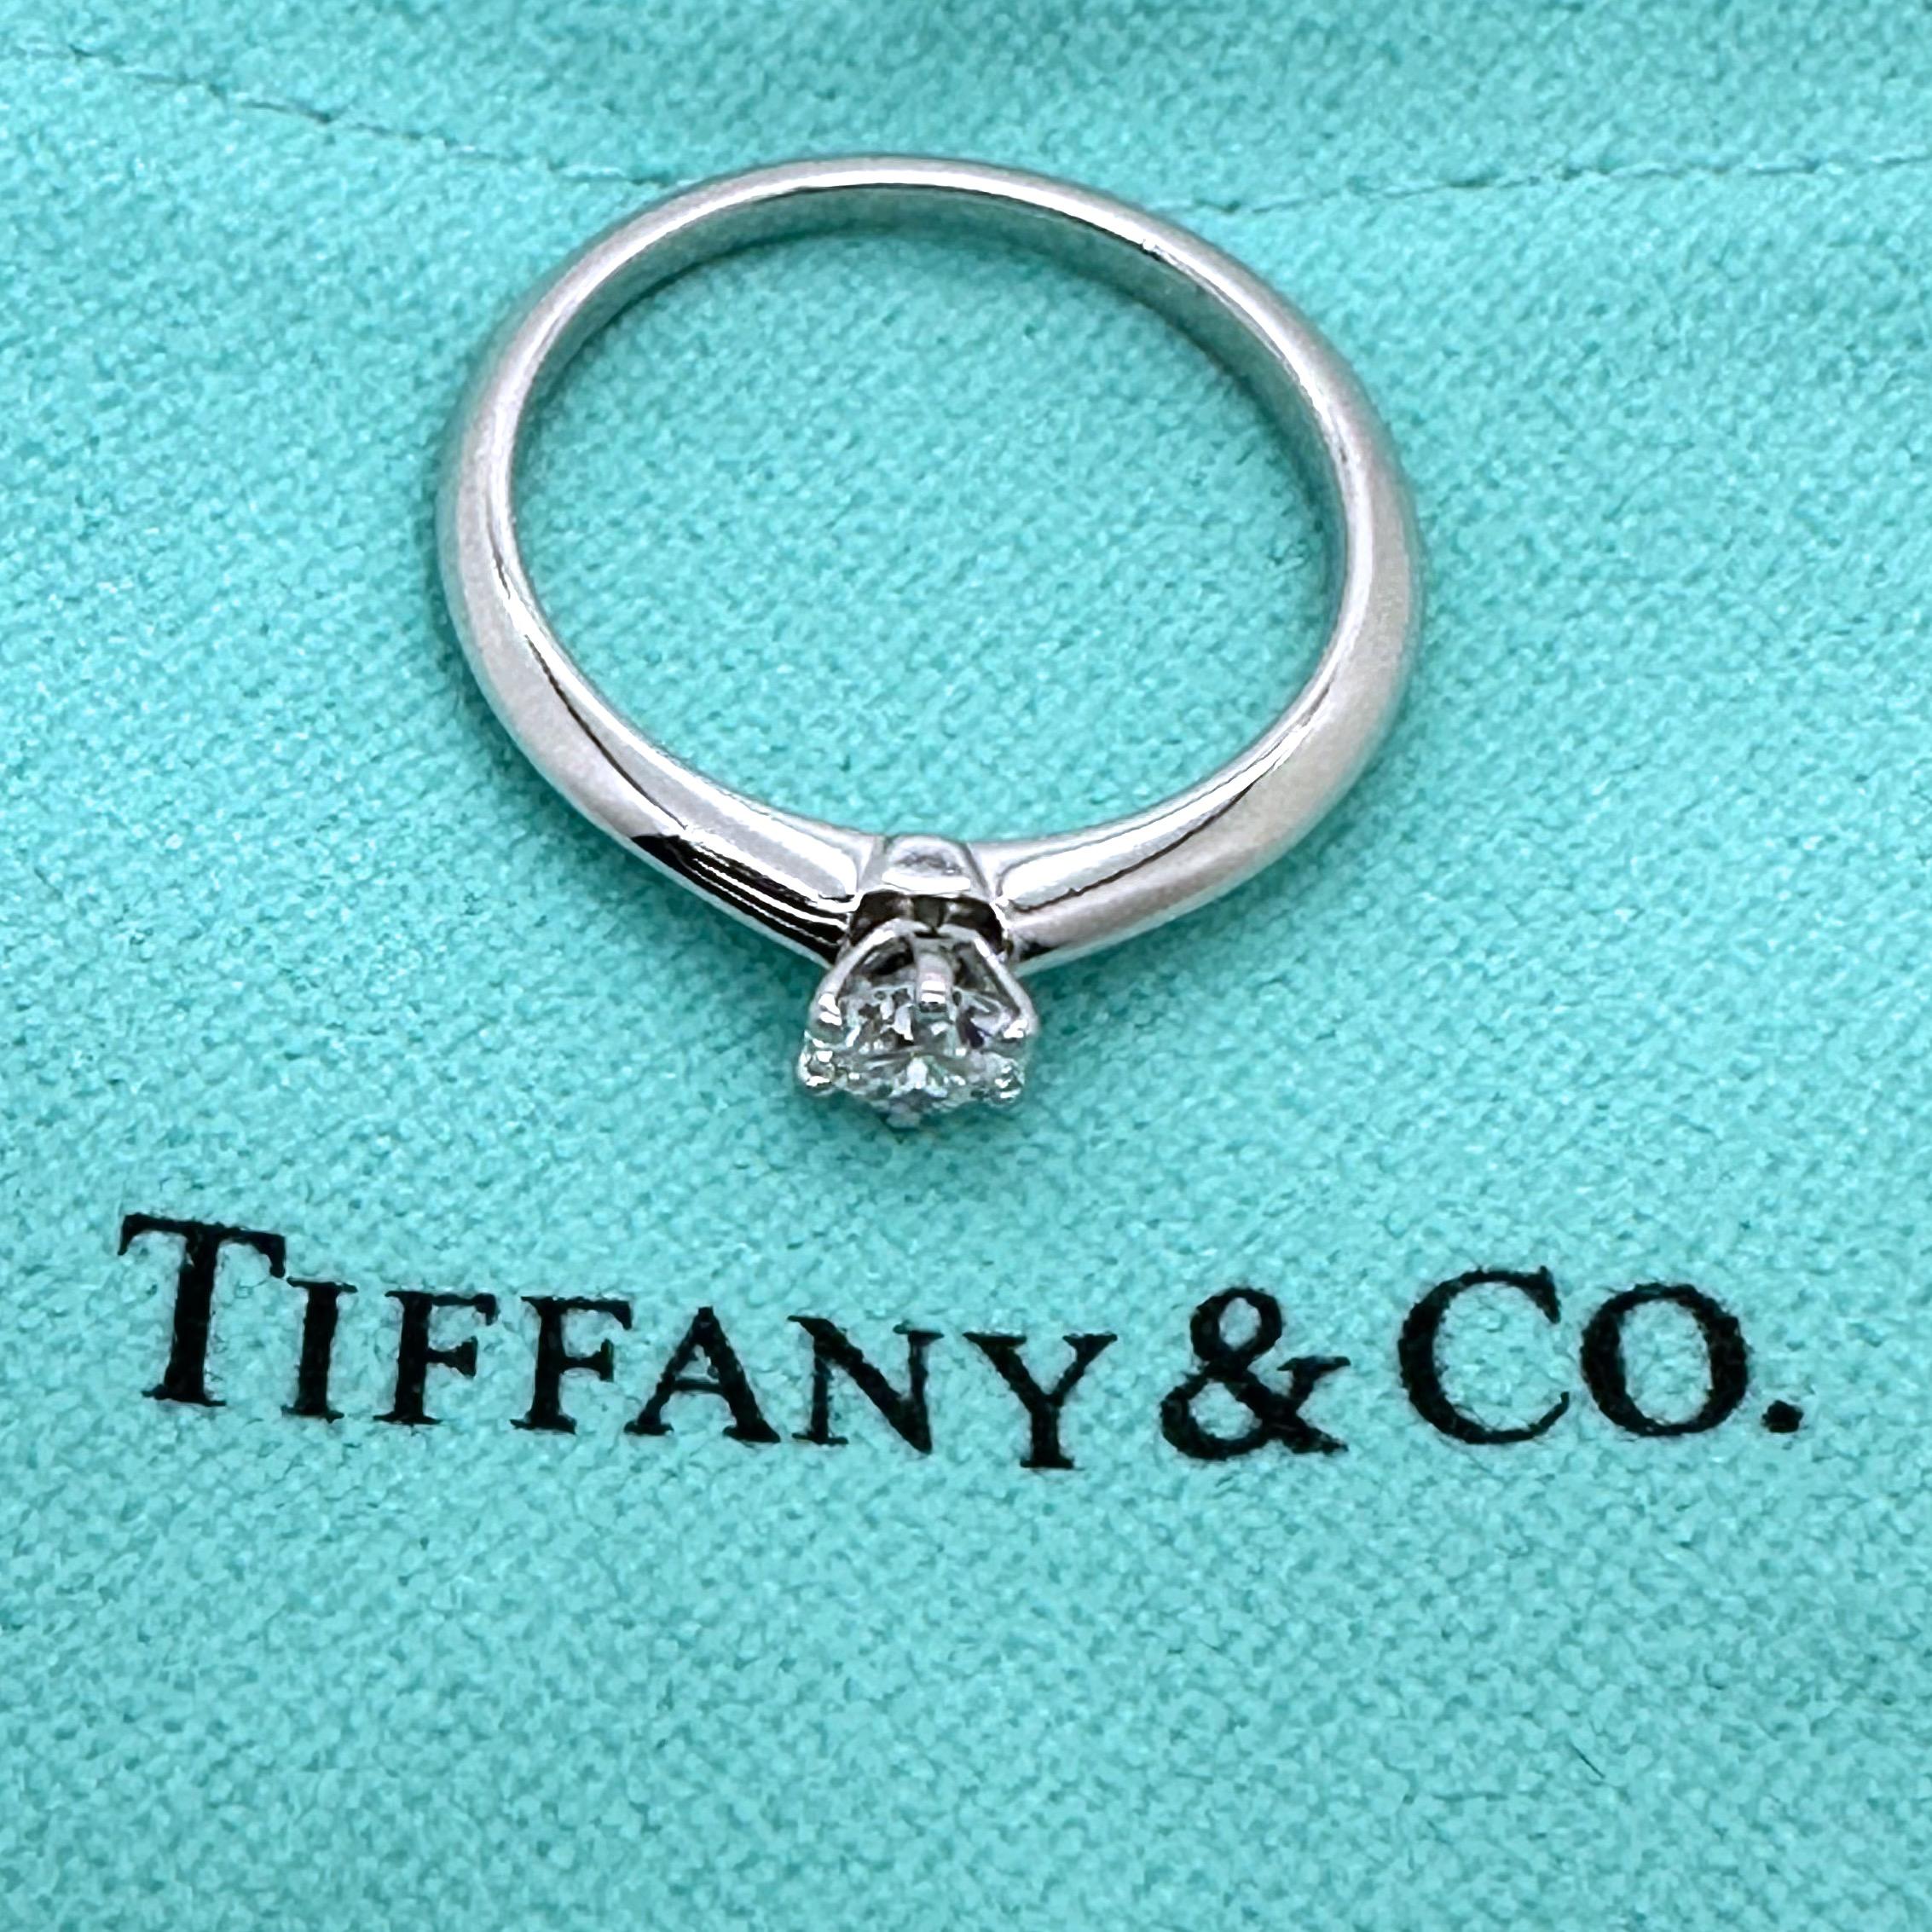 Tiffany & Co. Round Brilliant Diamond 0.29 cts D IF Solitaire Engagement Ring For Sale 8